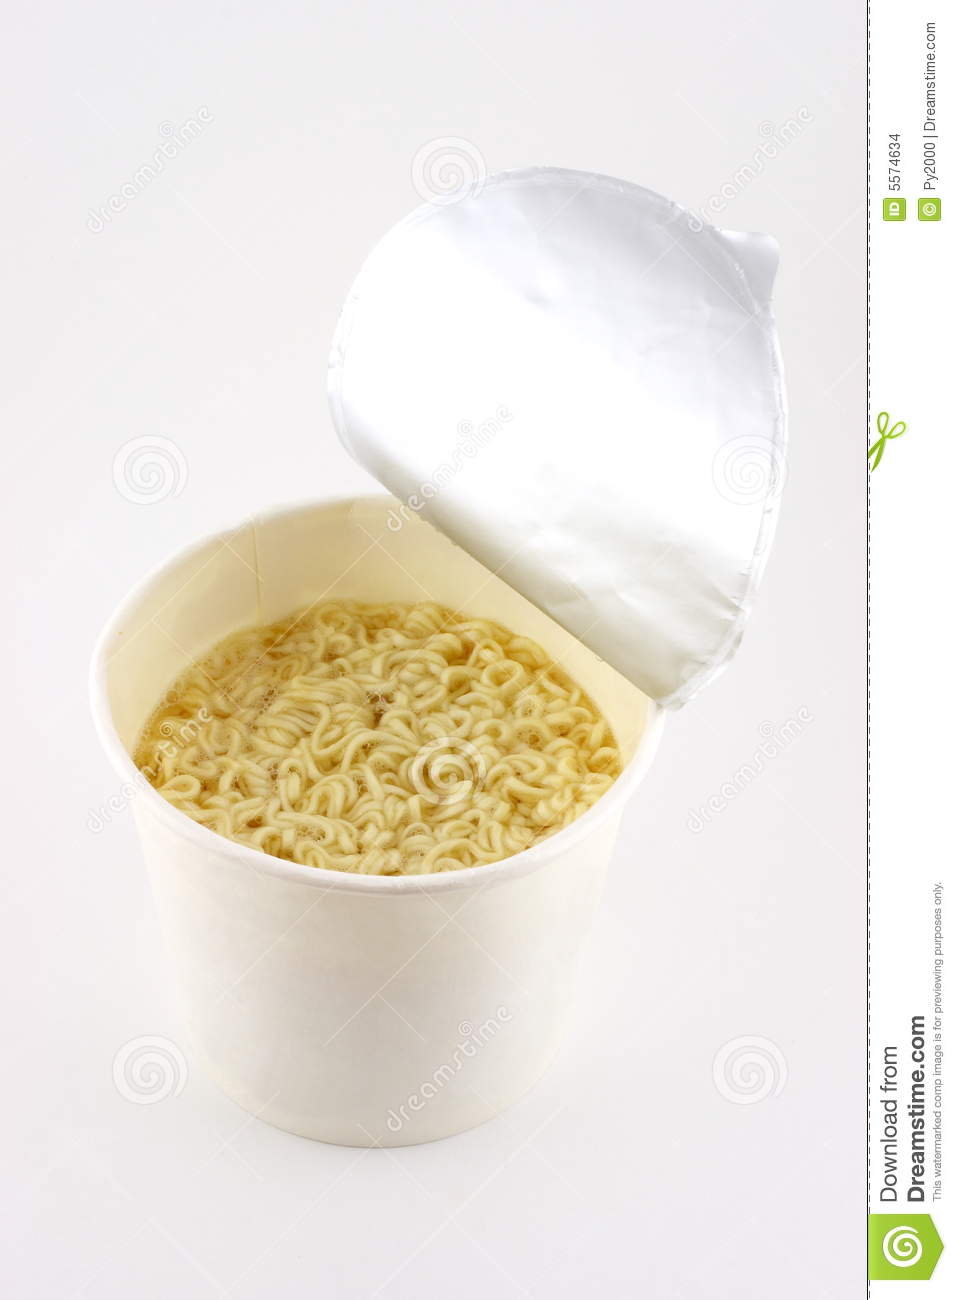 Throwaway Cardboard Cup Of Hot Instant Noodles In Broth Isolated